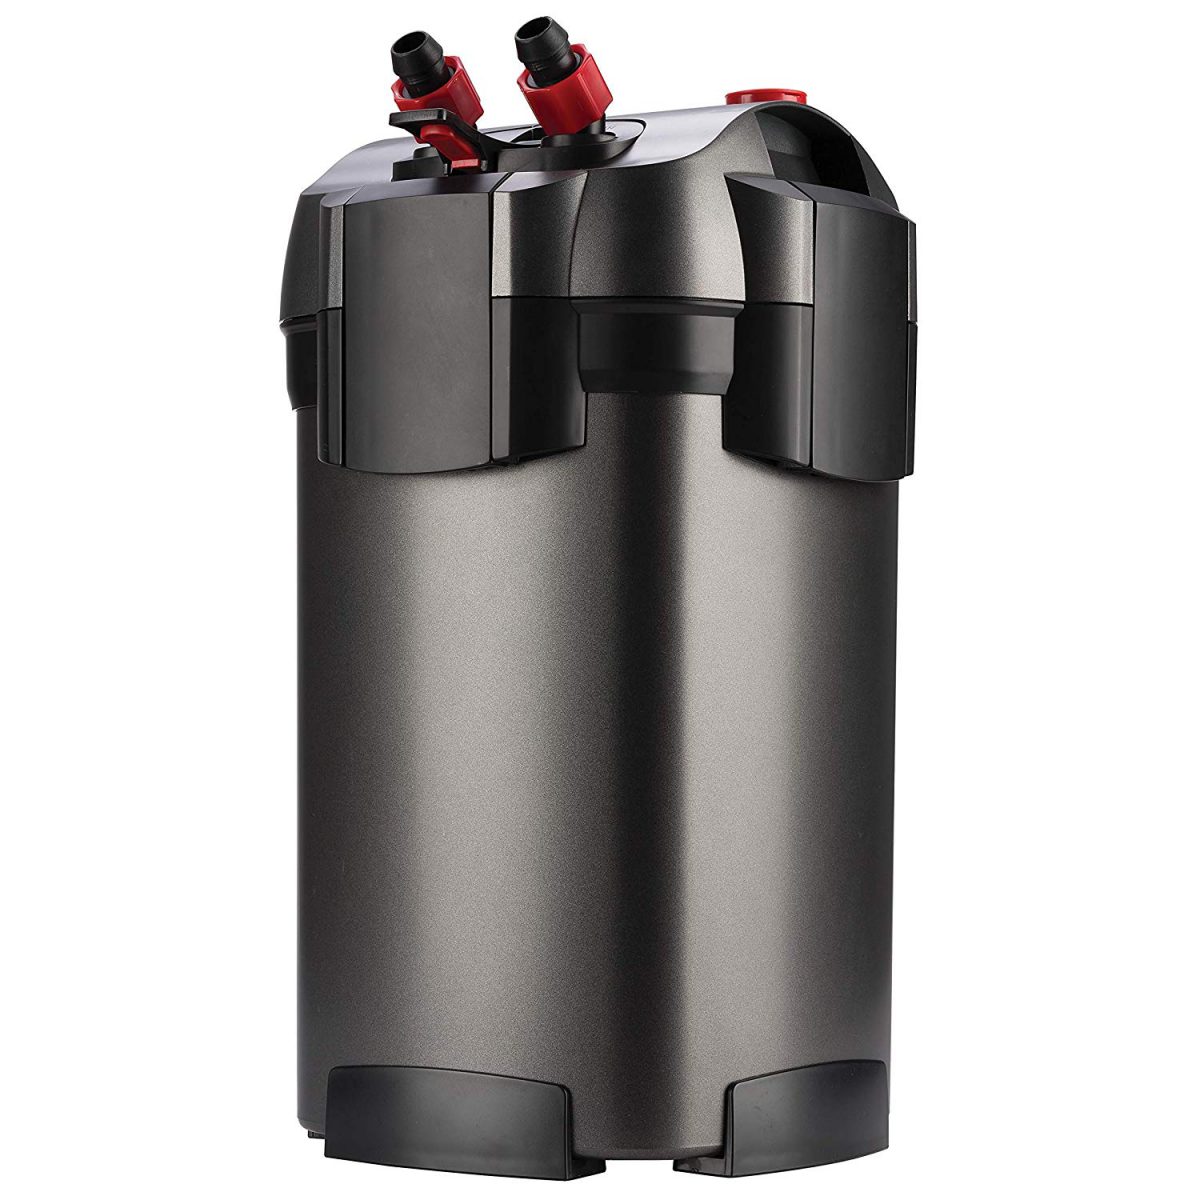 8 Best Aquarium Canister Filter Reviews {2019 Complete Guide}